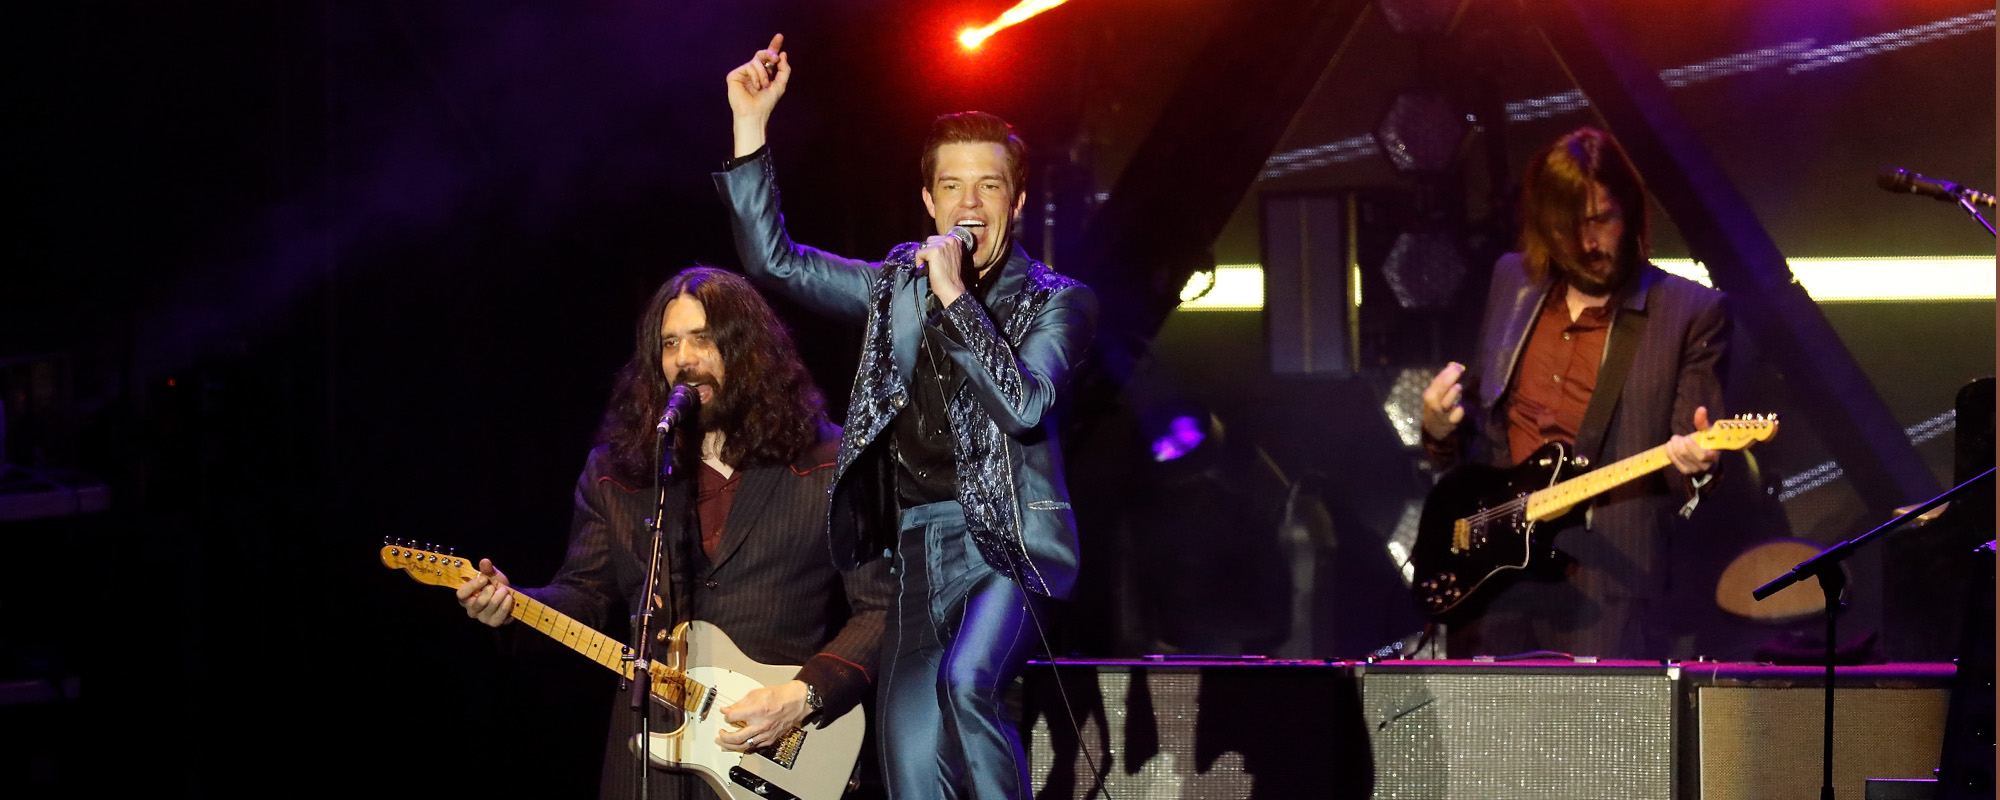 The Killers Respond to Angry Fans after Inviting Russian Drummer on Stage